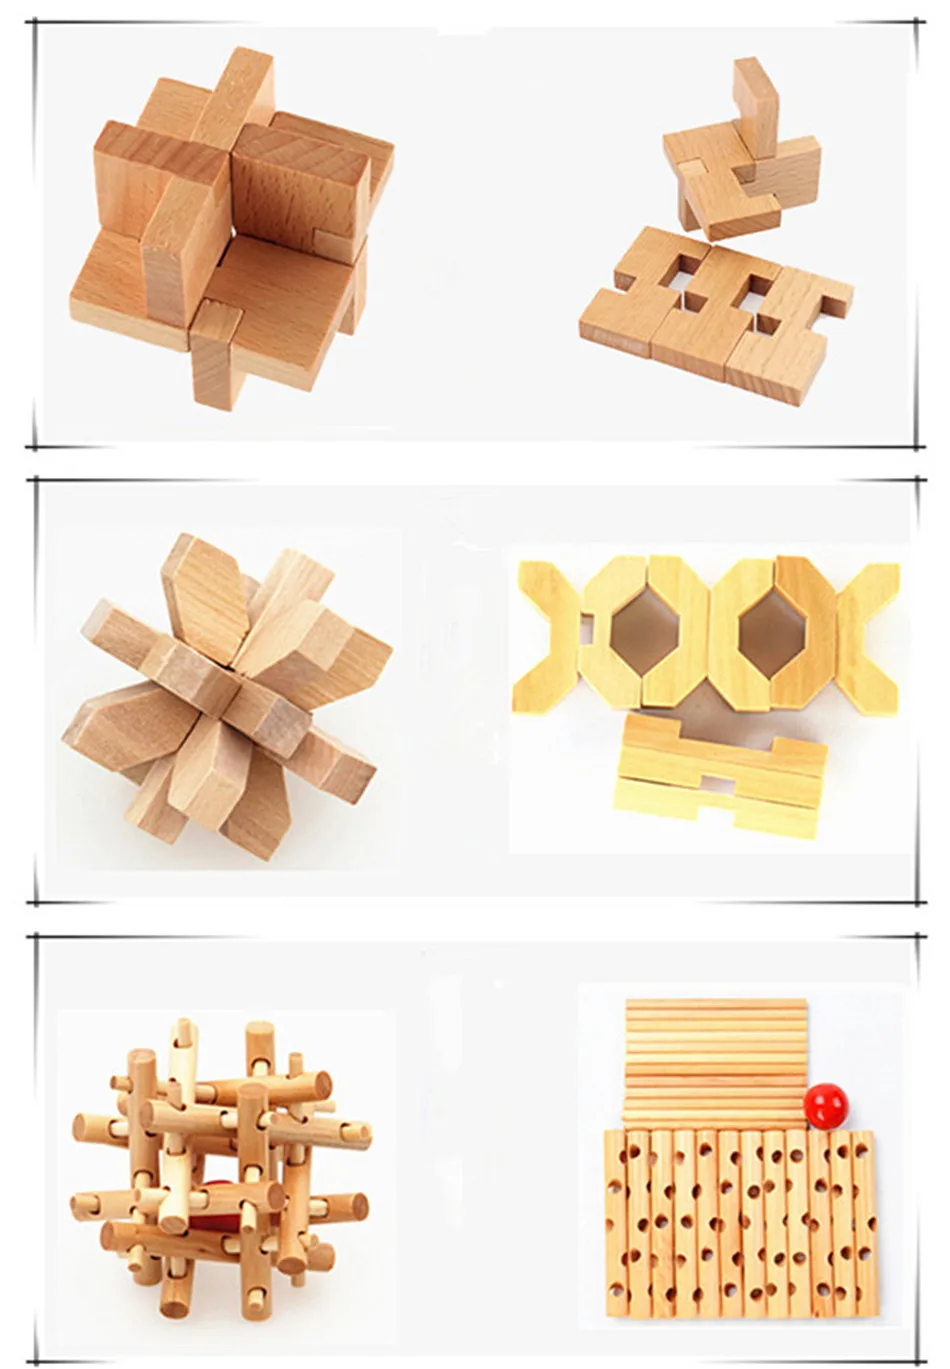 

Puzzle Box For adults iq Brain Teaser Jigsaw Wooden Lock Toy Kong Ming Lock 3D Interlocking Burr Puzzles Game Toy For Kids